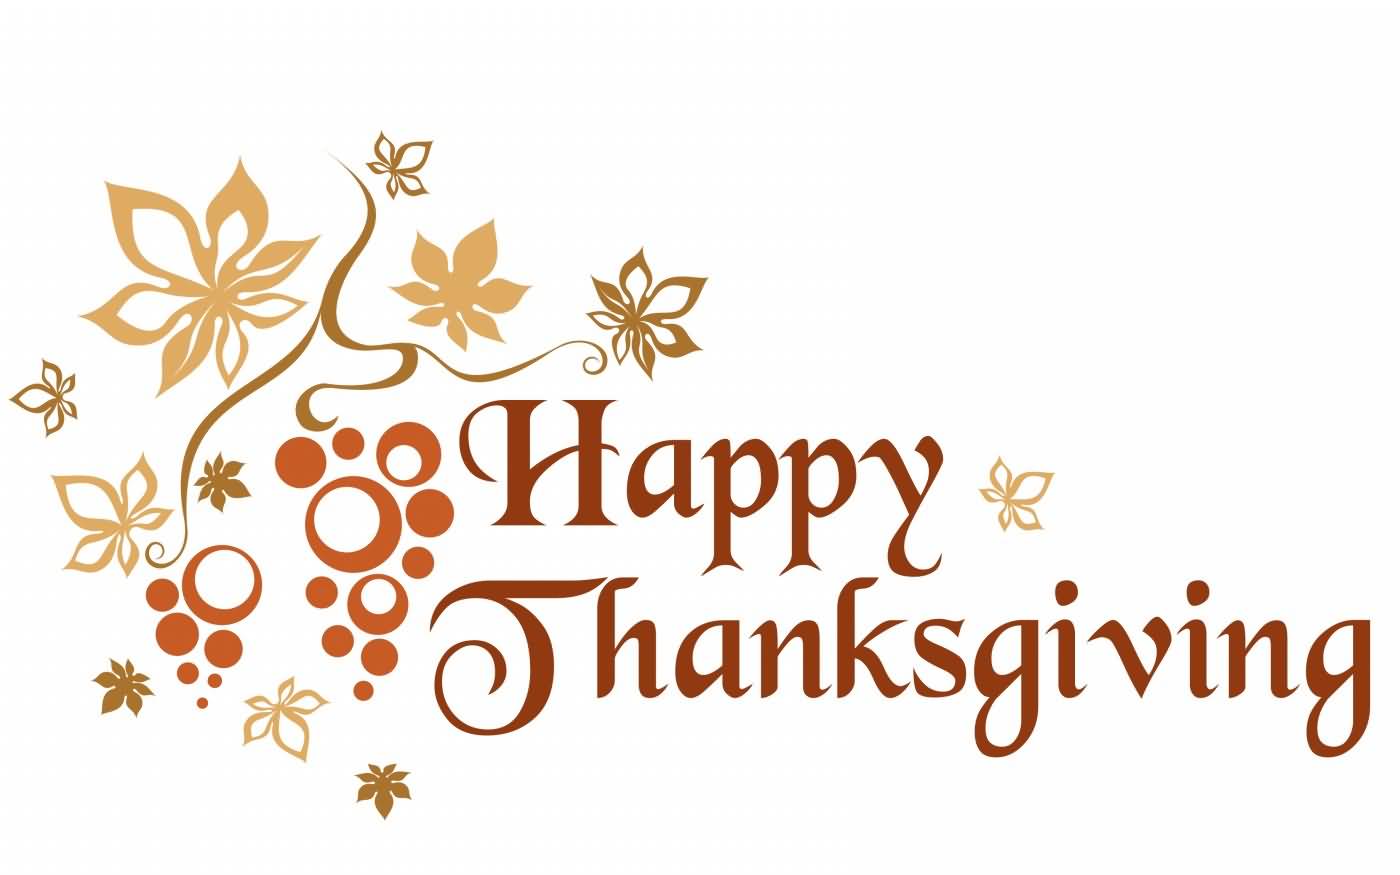 Wish You Happy Thanksgiving Day Greeting Card